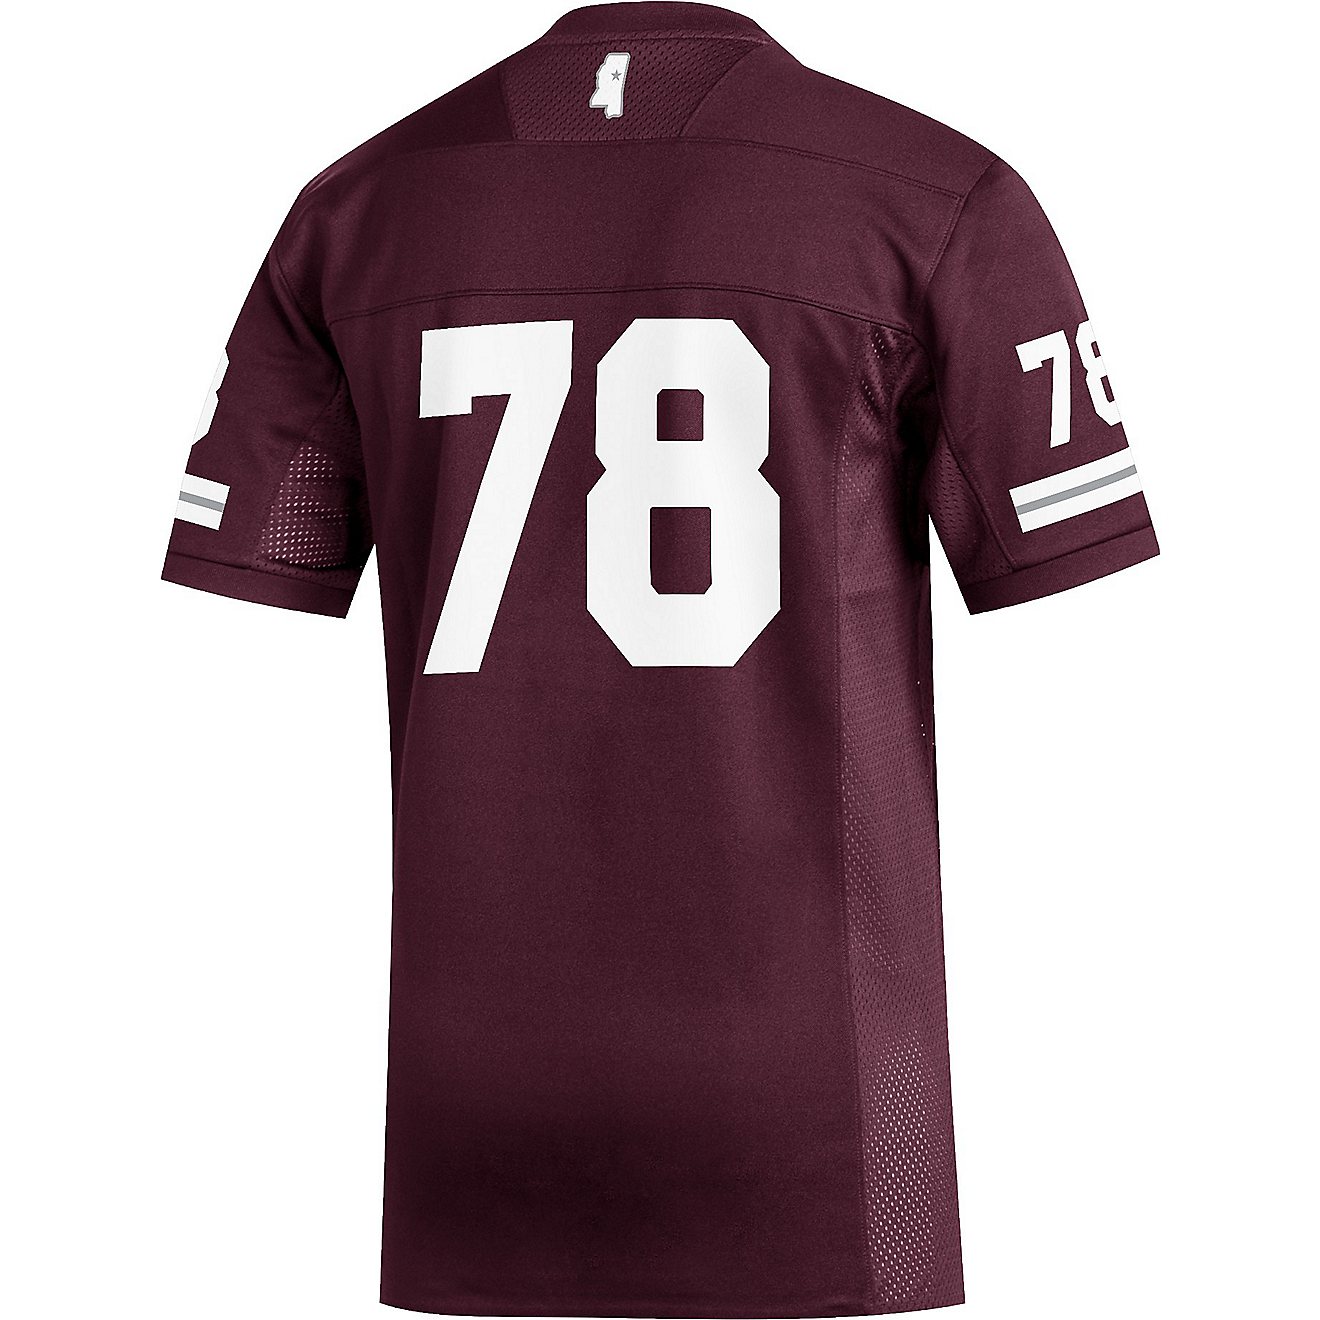 adidas Men's Mississippi State University Replica Football Jersey                                                                - view number 2